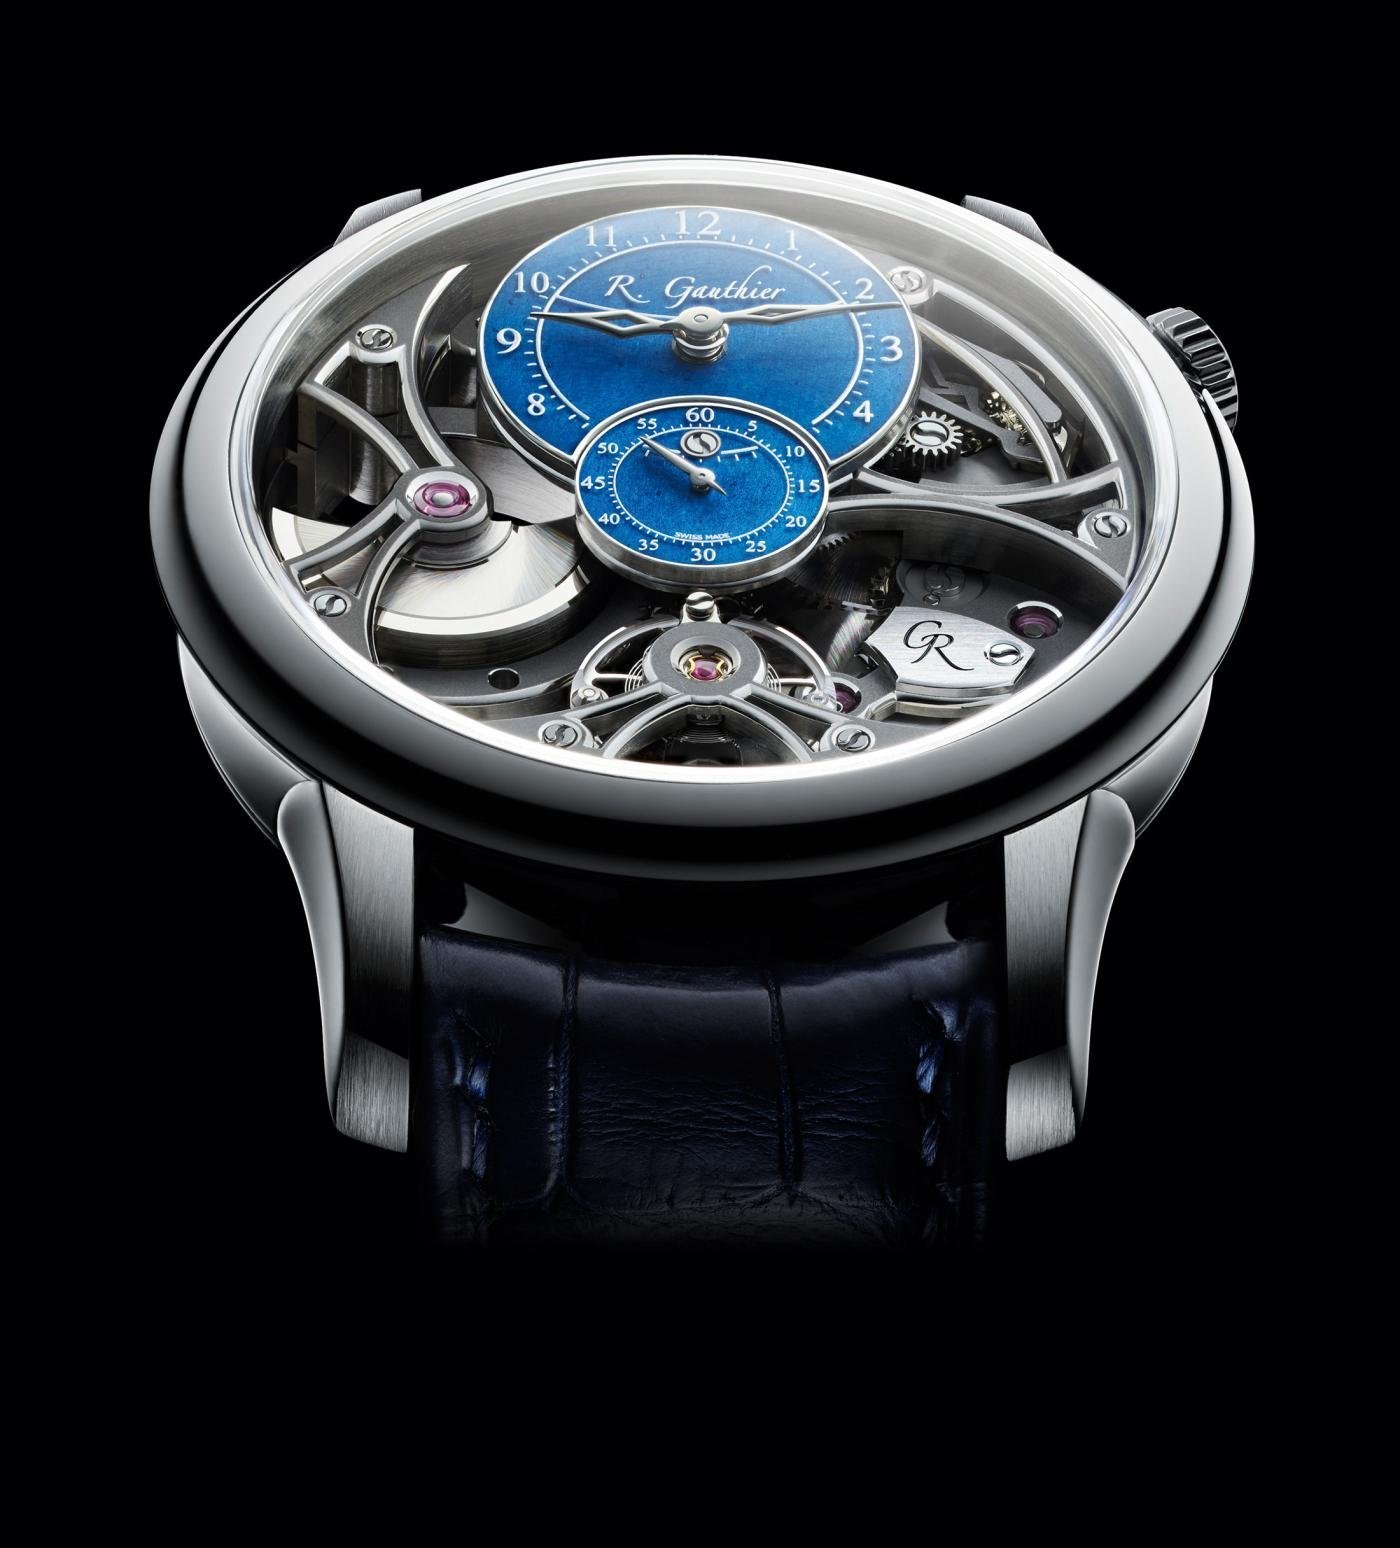 Romain Gauthier: The Insight Micro-Rotor Squelette